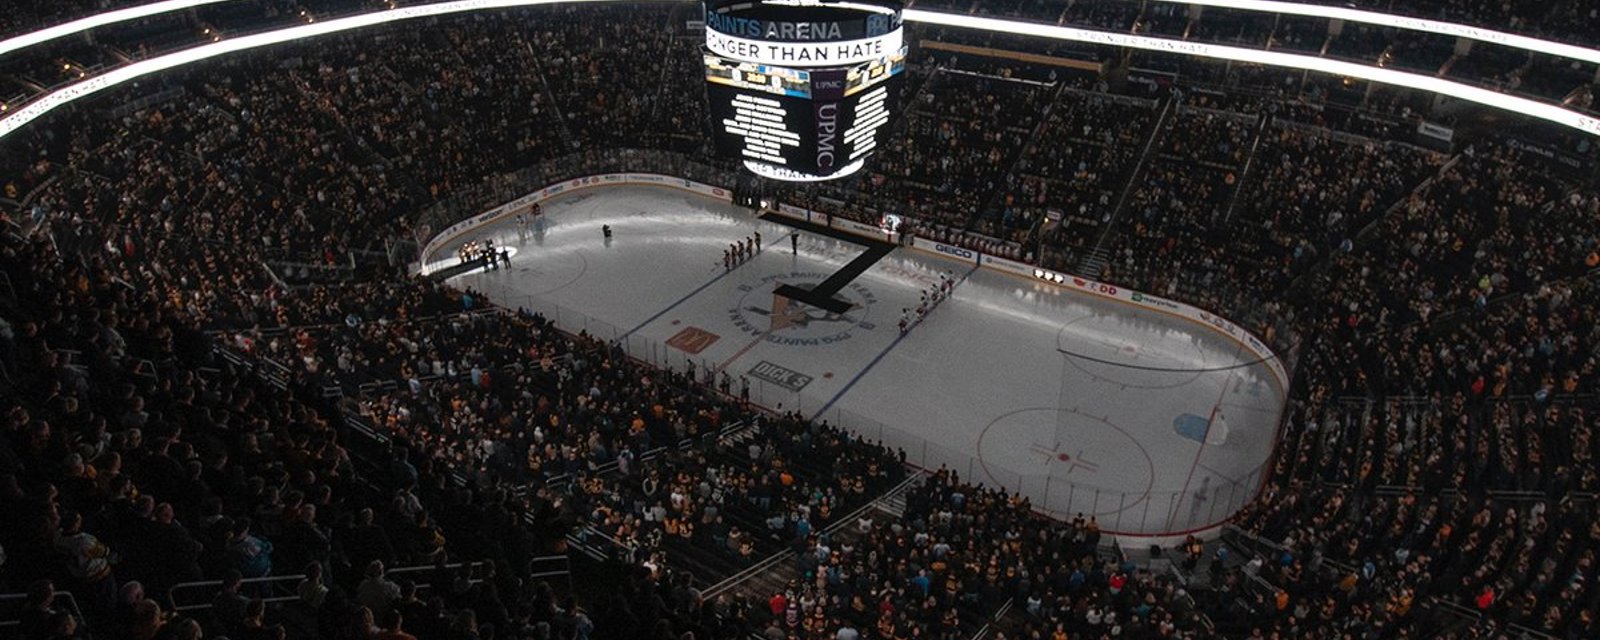 Penguins offer emotional puck drop ceremony before game vs. Islanders following tragic shooting 